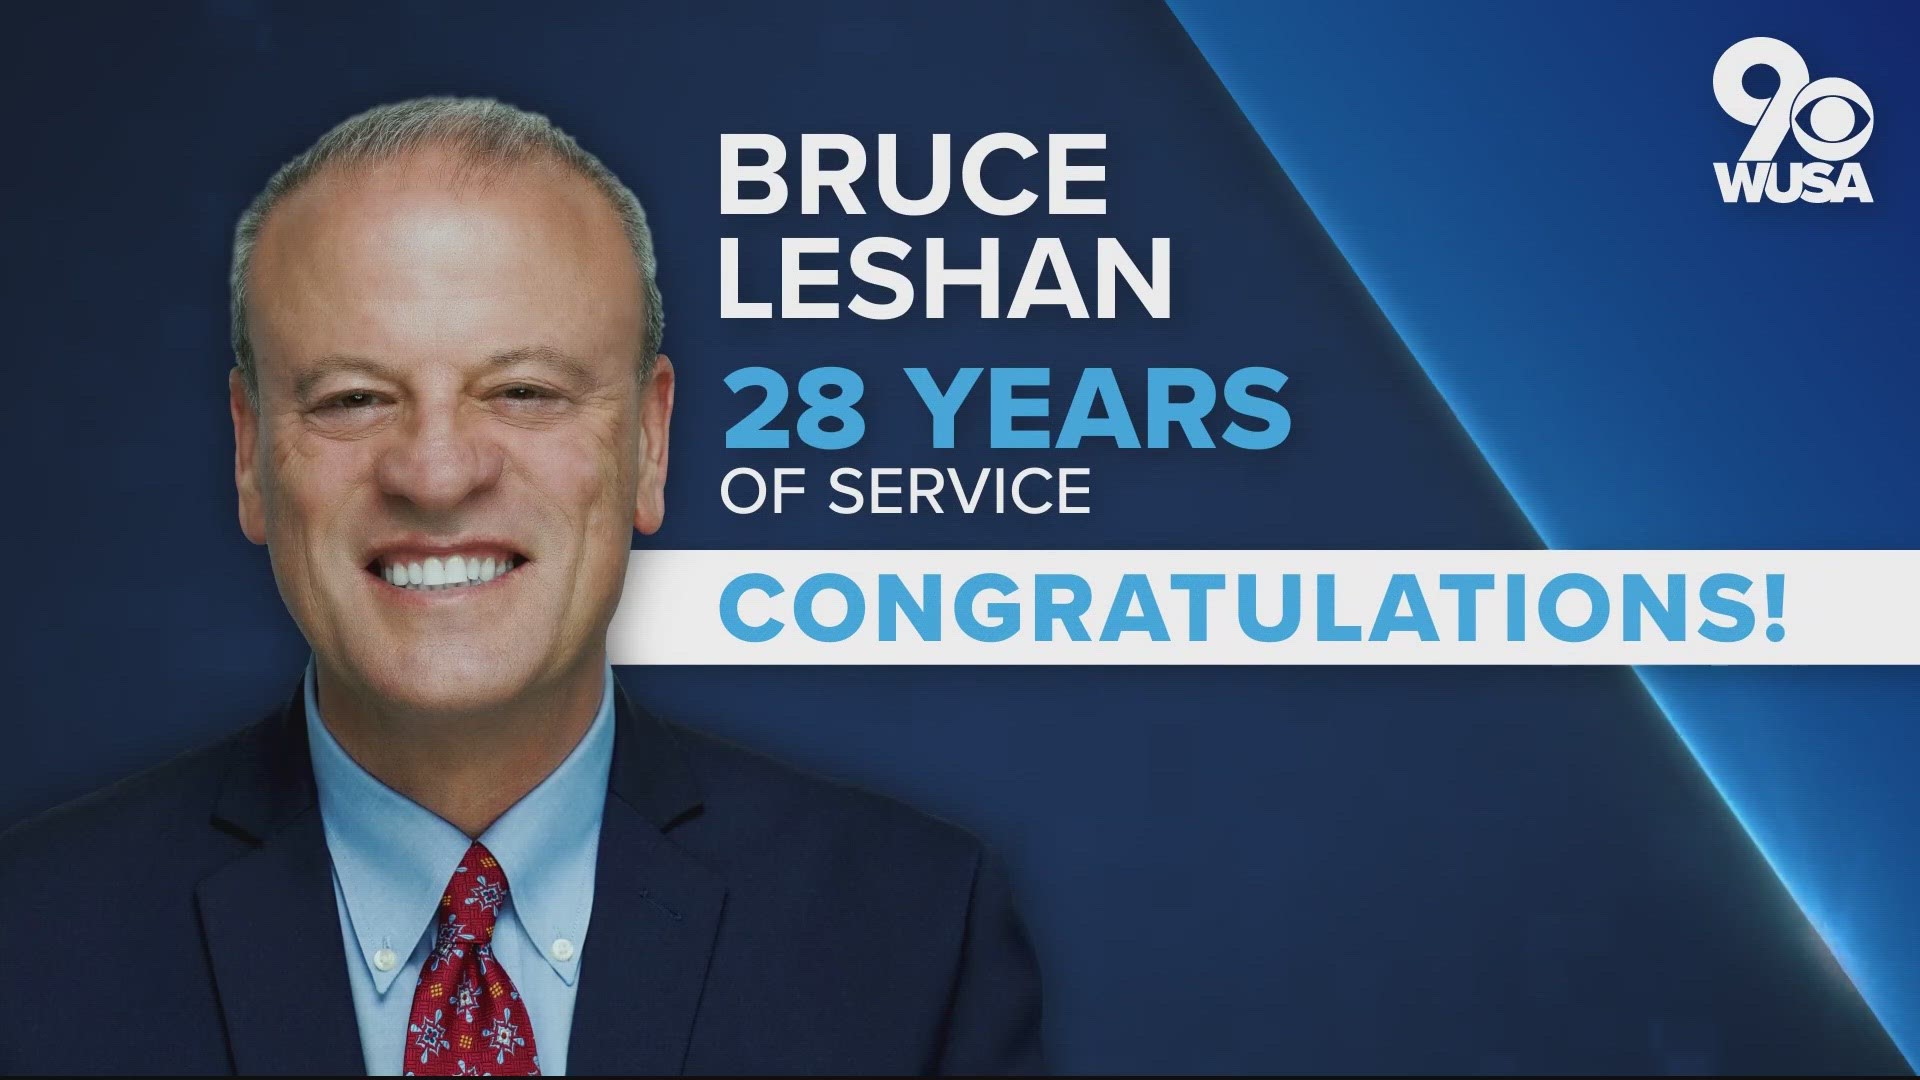 Our colleague and friend, Bruce Leshan, is winding down his career after 28-years at WUSA9. His reporting has a tremendous impact on countless lives across DC.